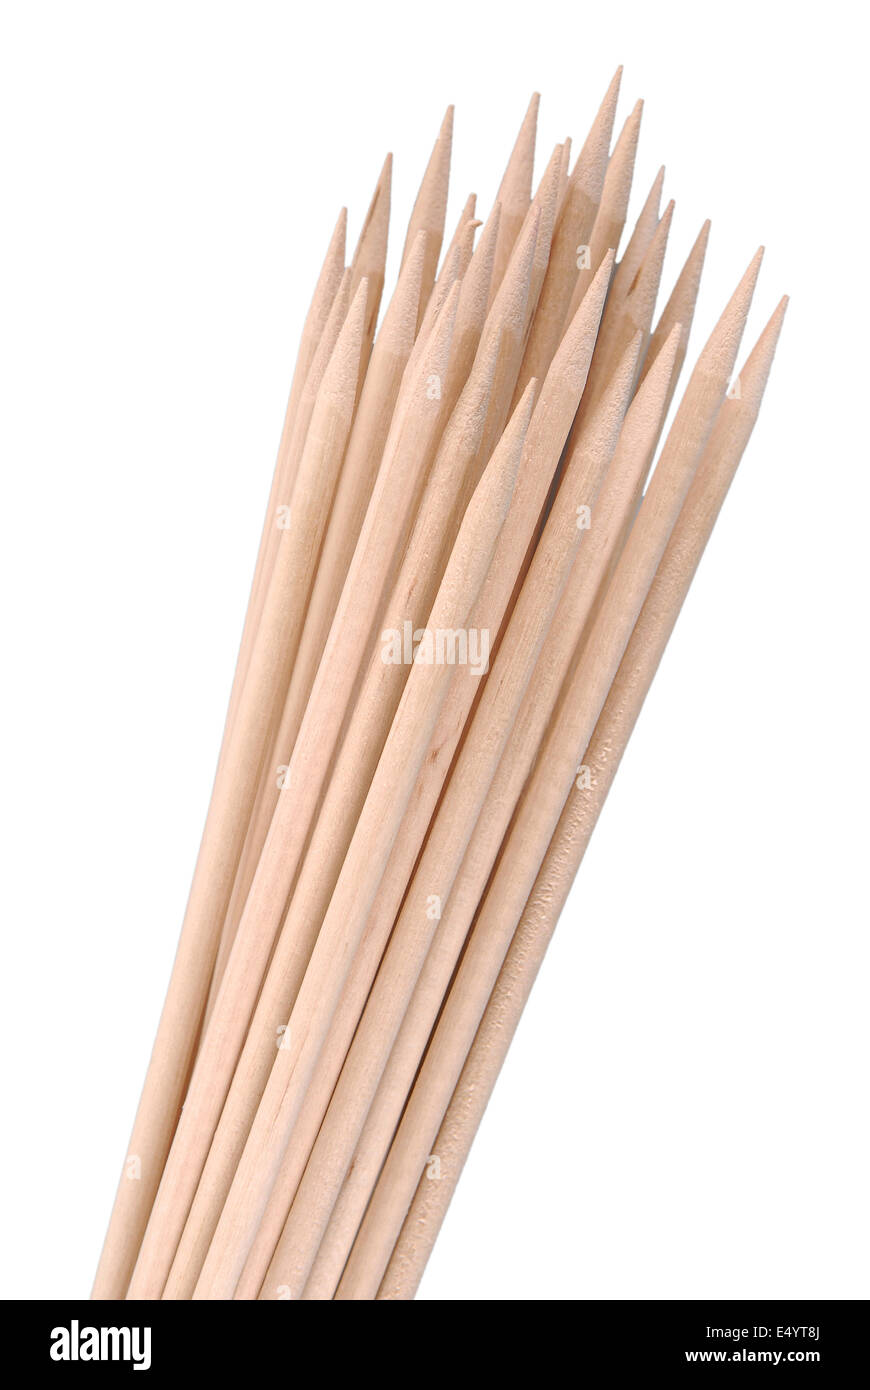 Multiple wooden bamboo skewers laying Stock Photo